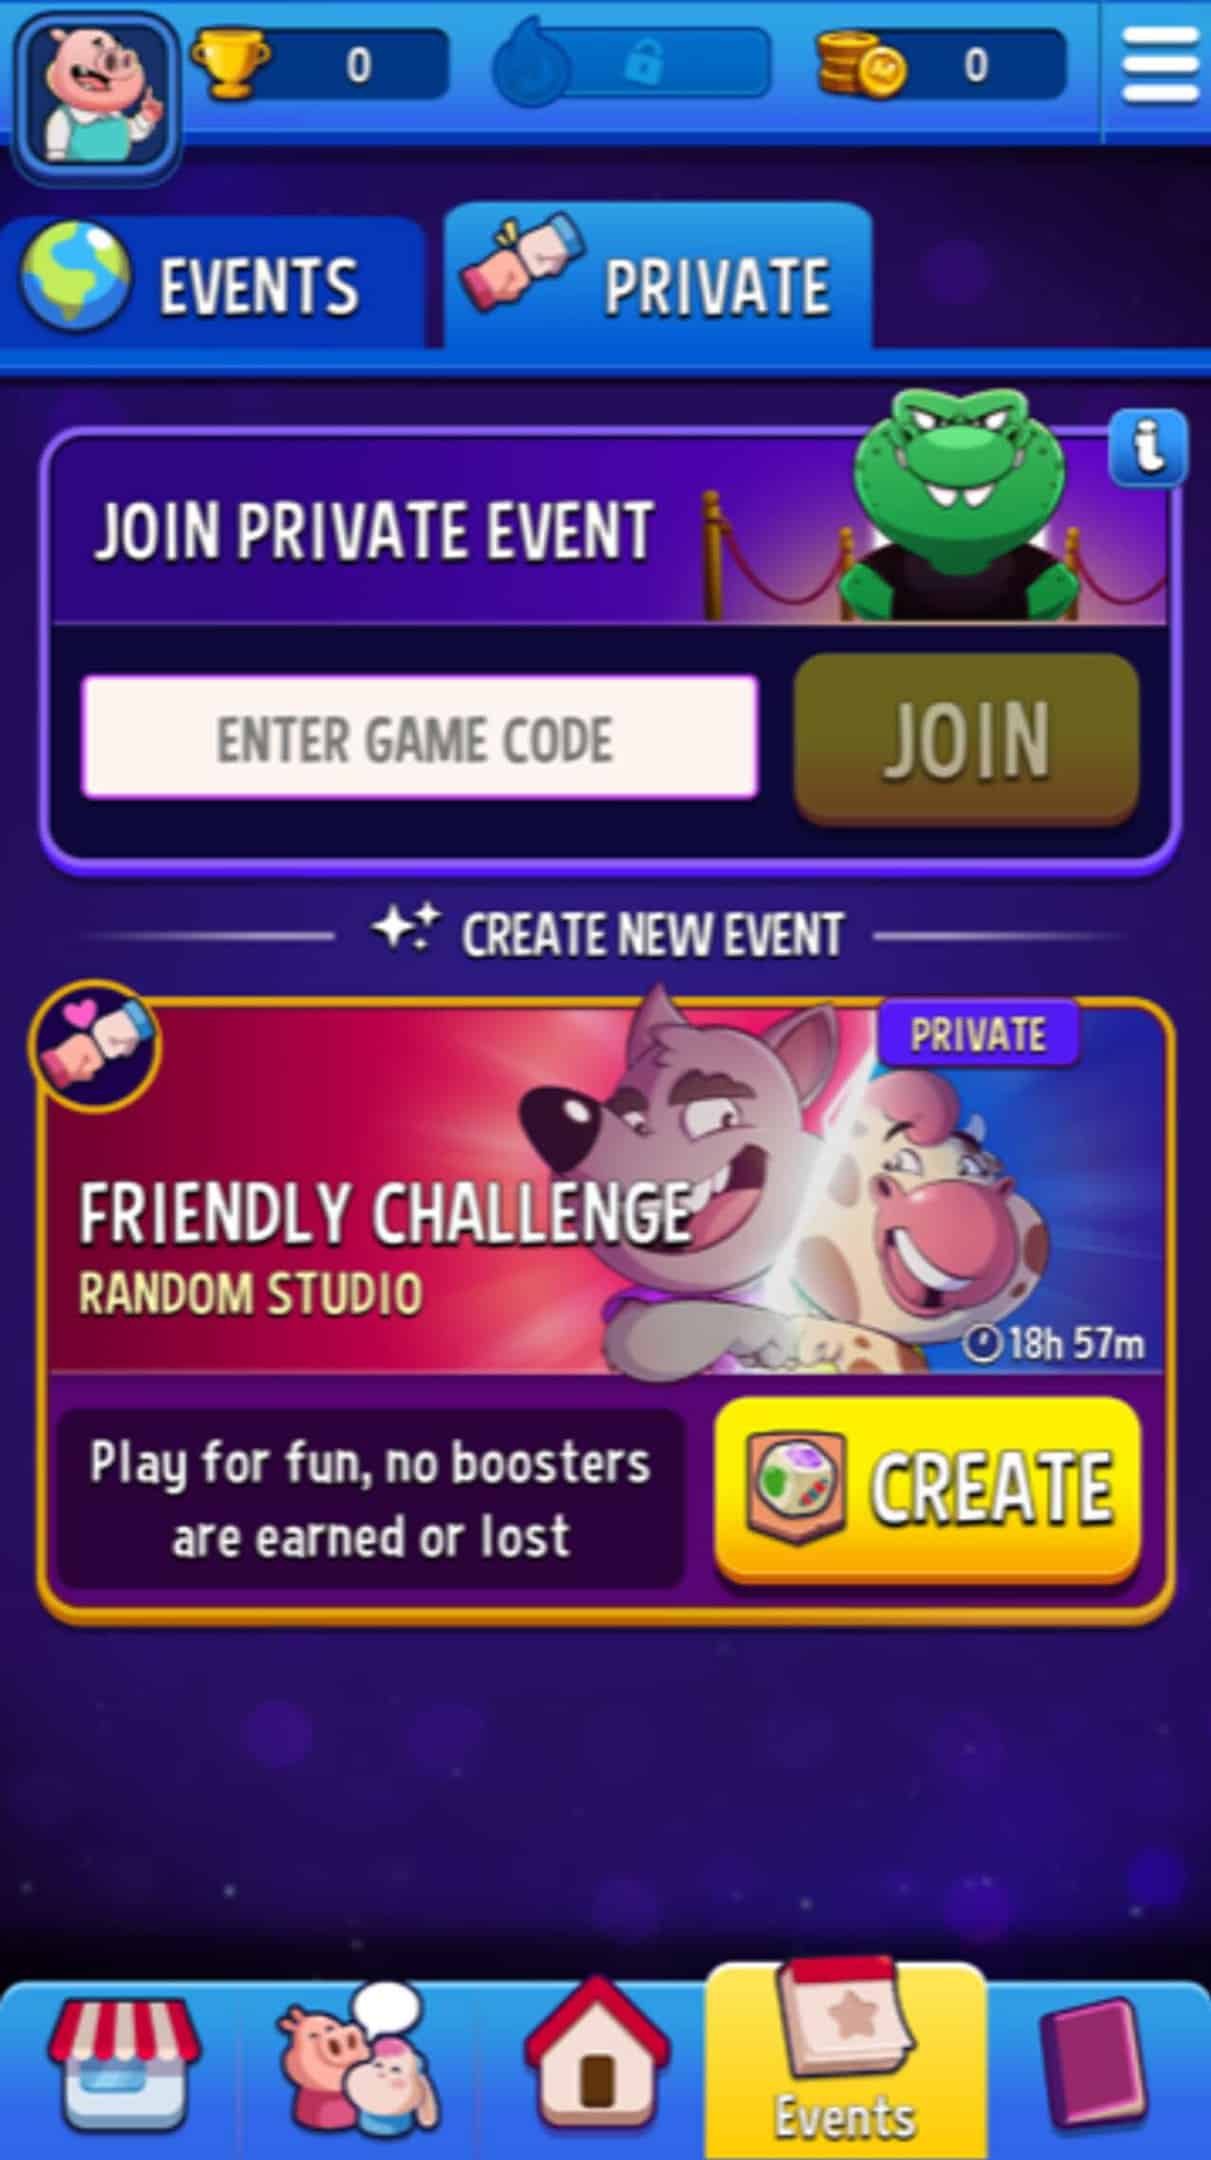 Check out this screenshot of Match Masters on a mobile phone! Want to learn how to play with friends?